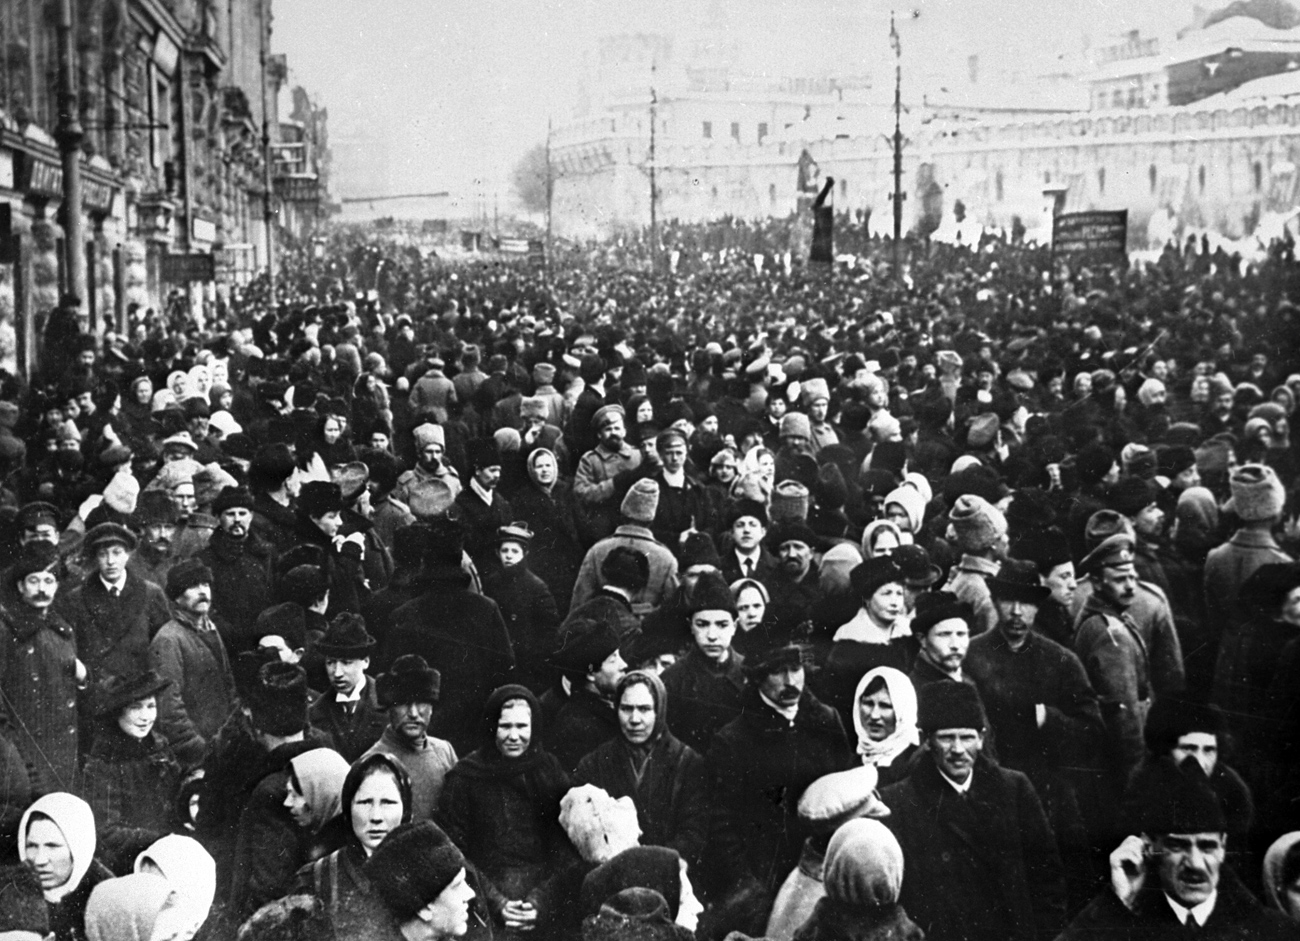 Muscovites demonstrating on Teatralnaya Square during the February bourgeois and democratic revolution. Reproduction of 1917 photo.